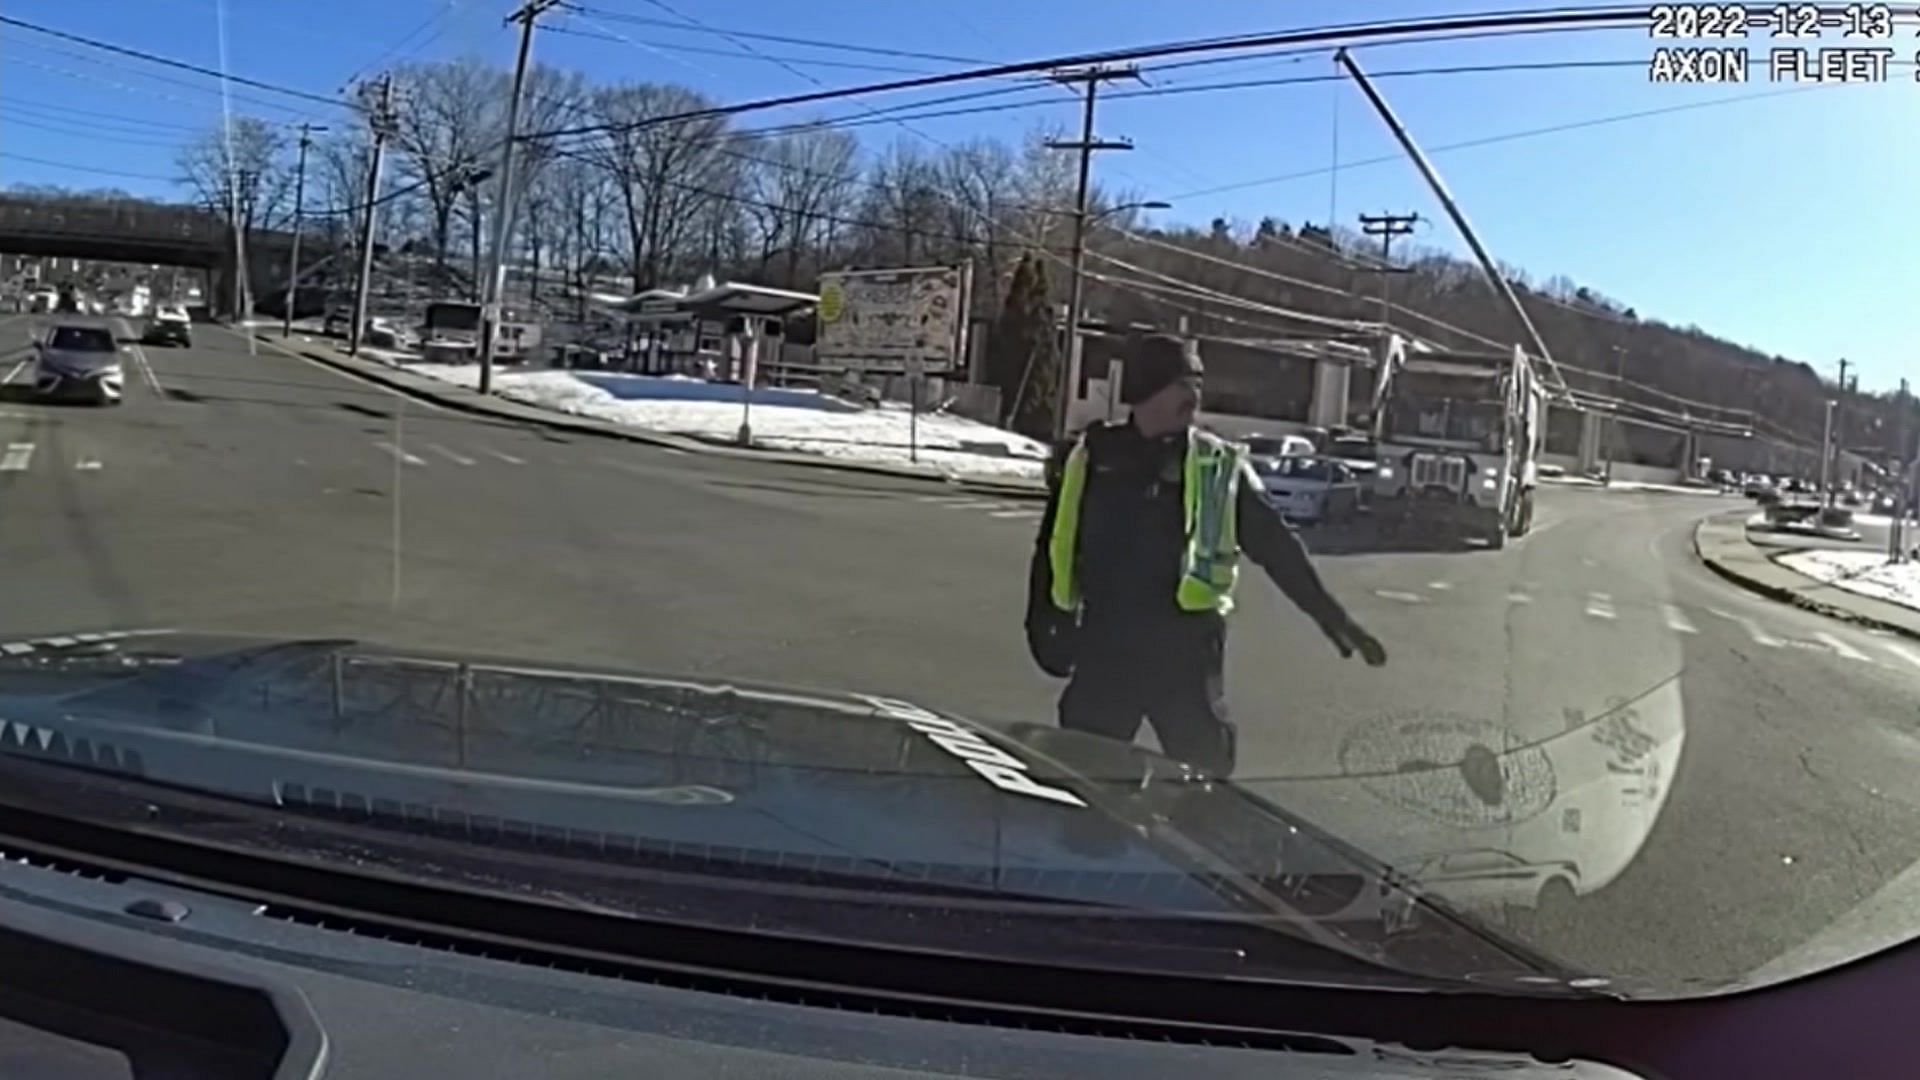 The officer claimed he had grounds to arrest the woman (image via Connecticut Authorities)